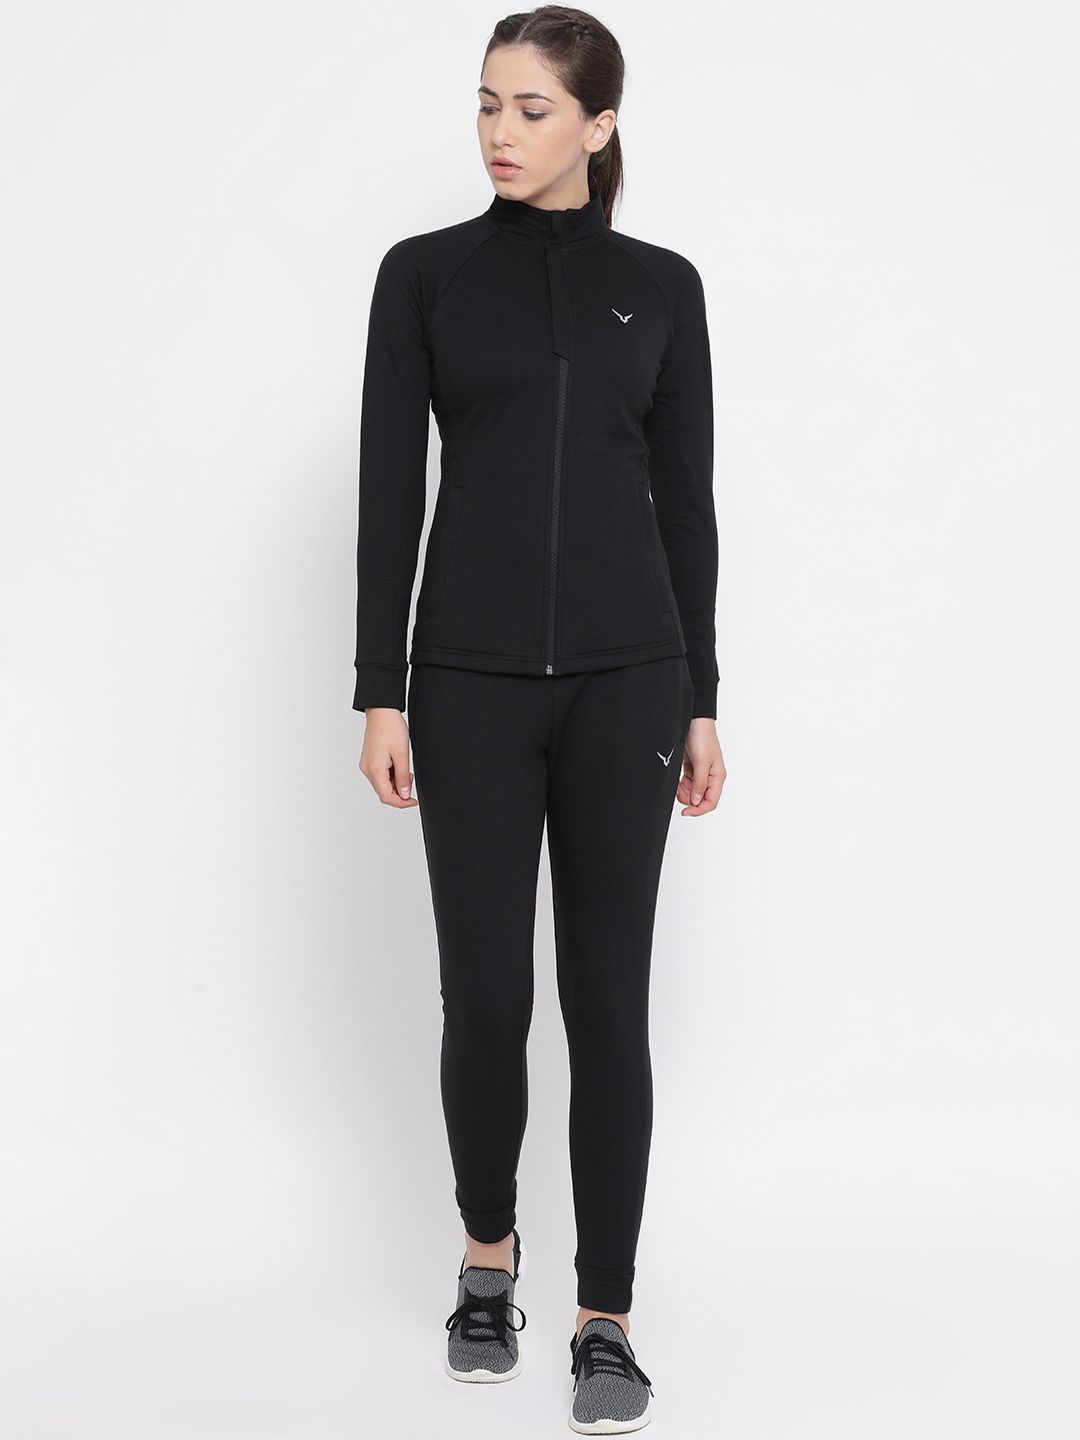 Invincible Women Black Solid Slim Fit Tracksuit Price in India